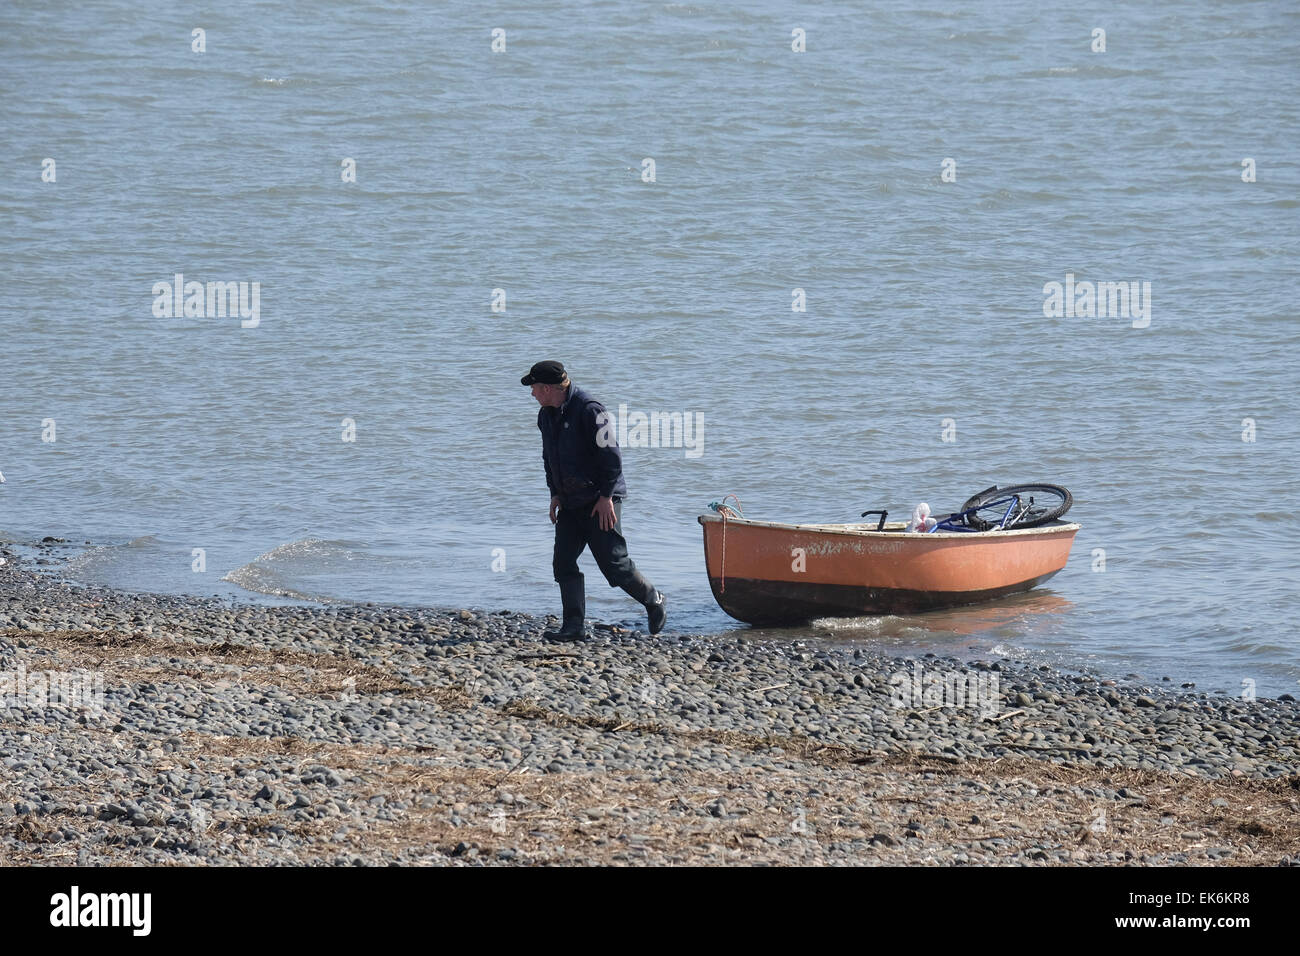 Man leaves Rowing Boat containing bicycle on the shore at Lytham St Annes Stock Photo